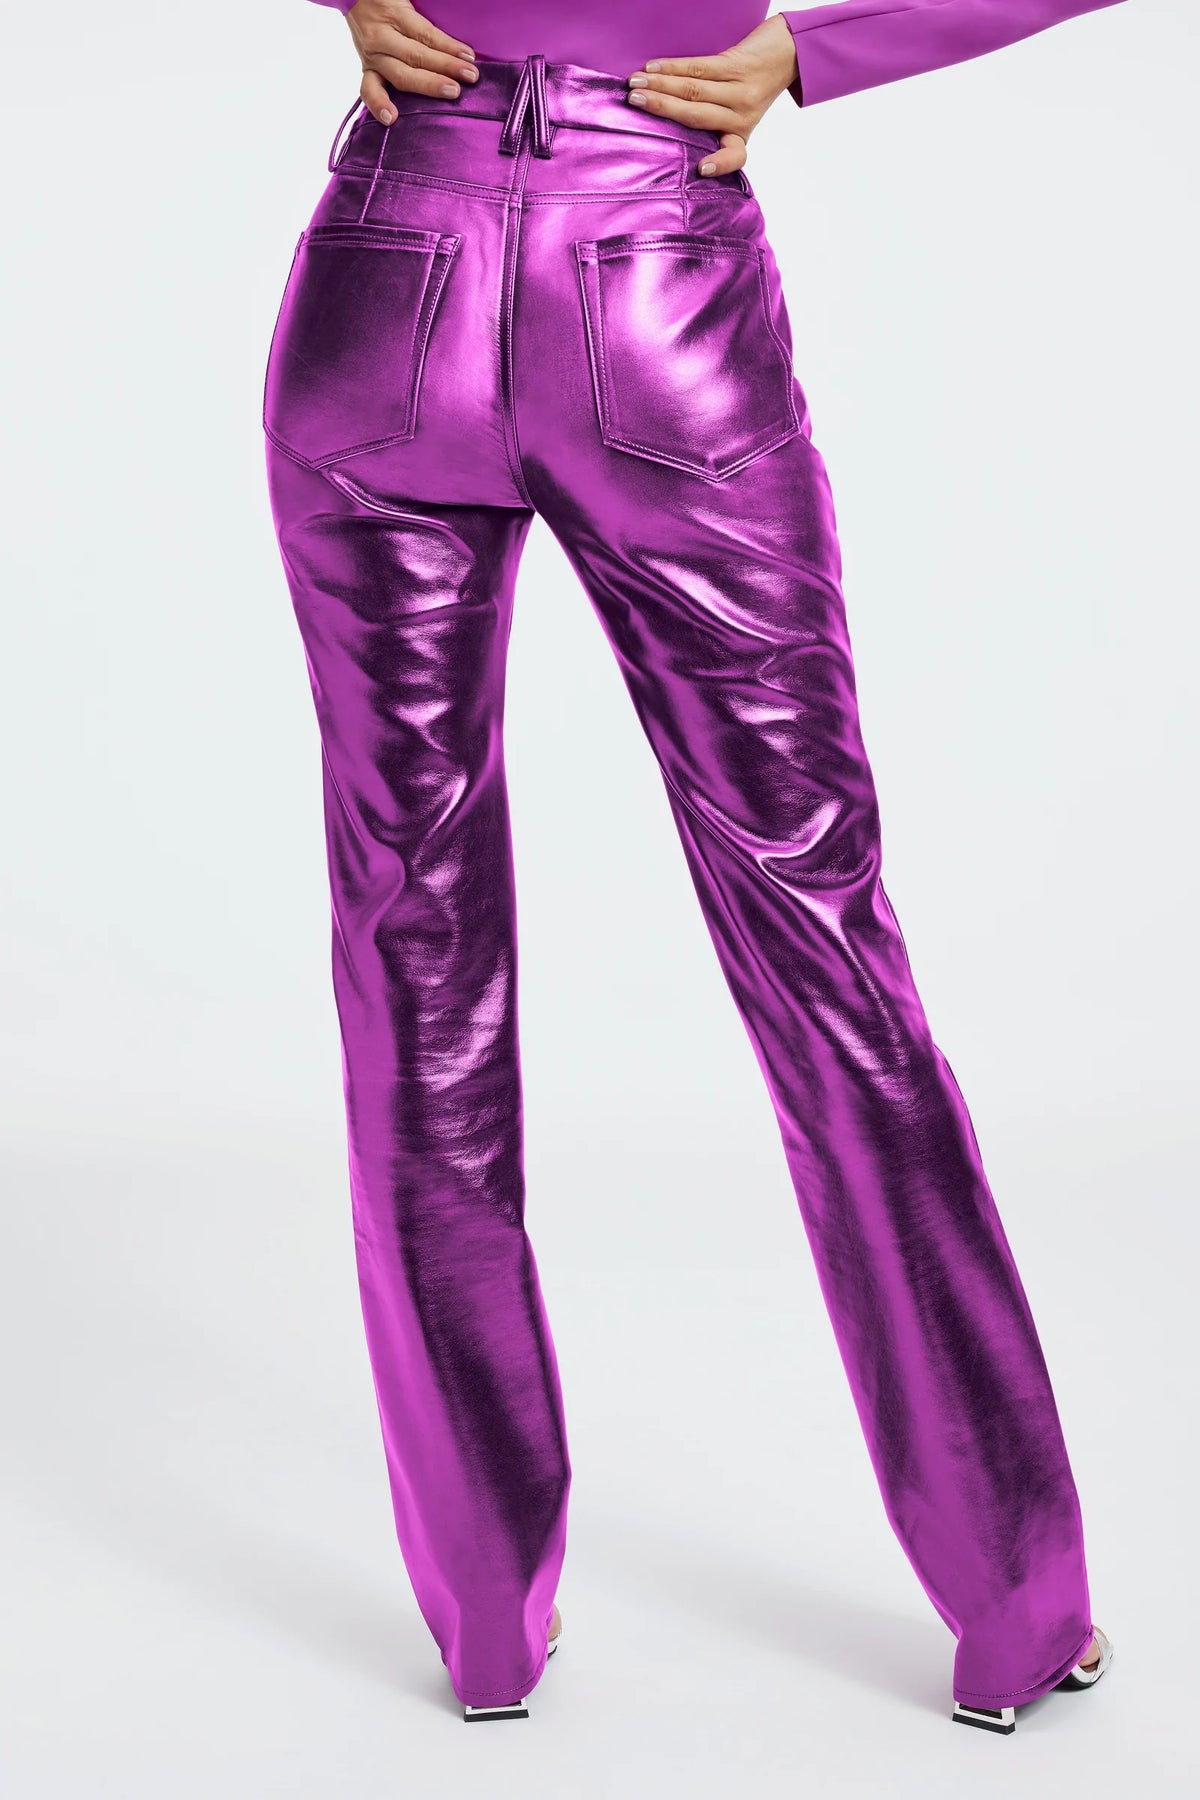 Women Satin Flared Pants Faux Ice Silk Trousers Bell-bottoms High